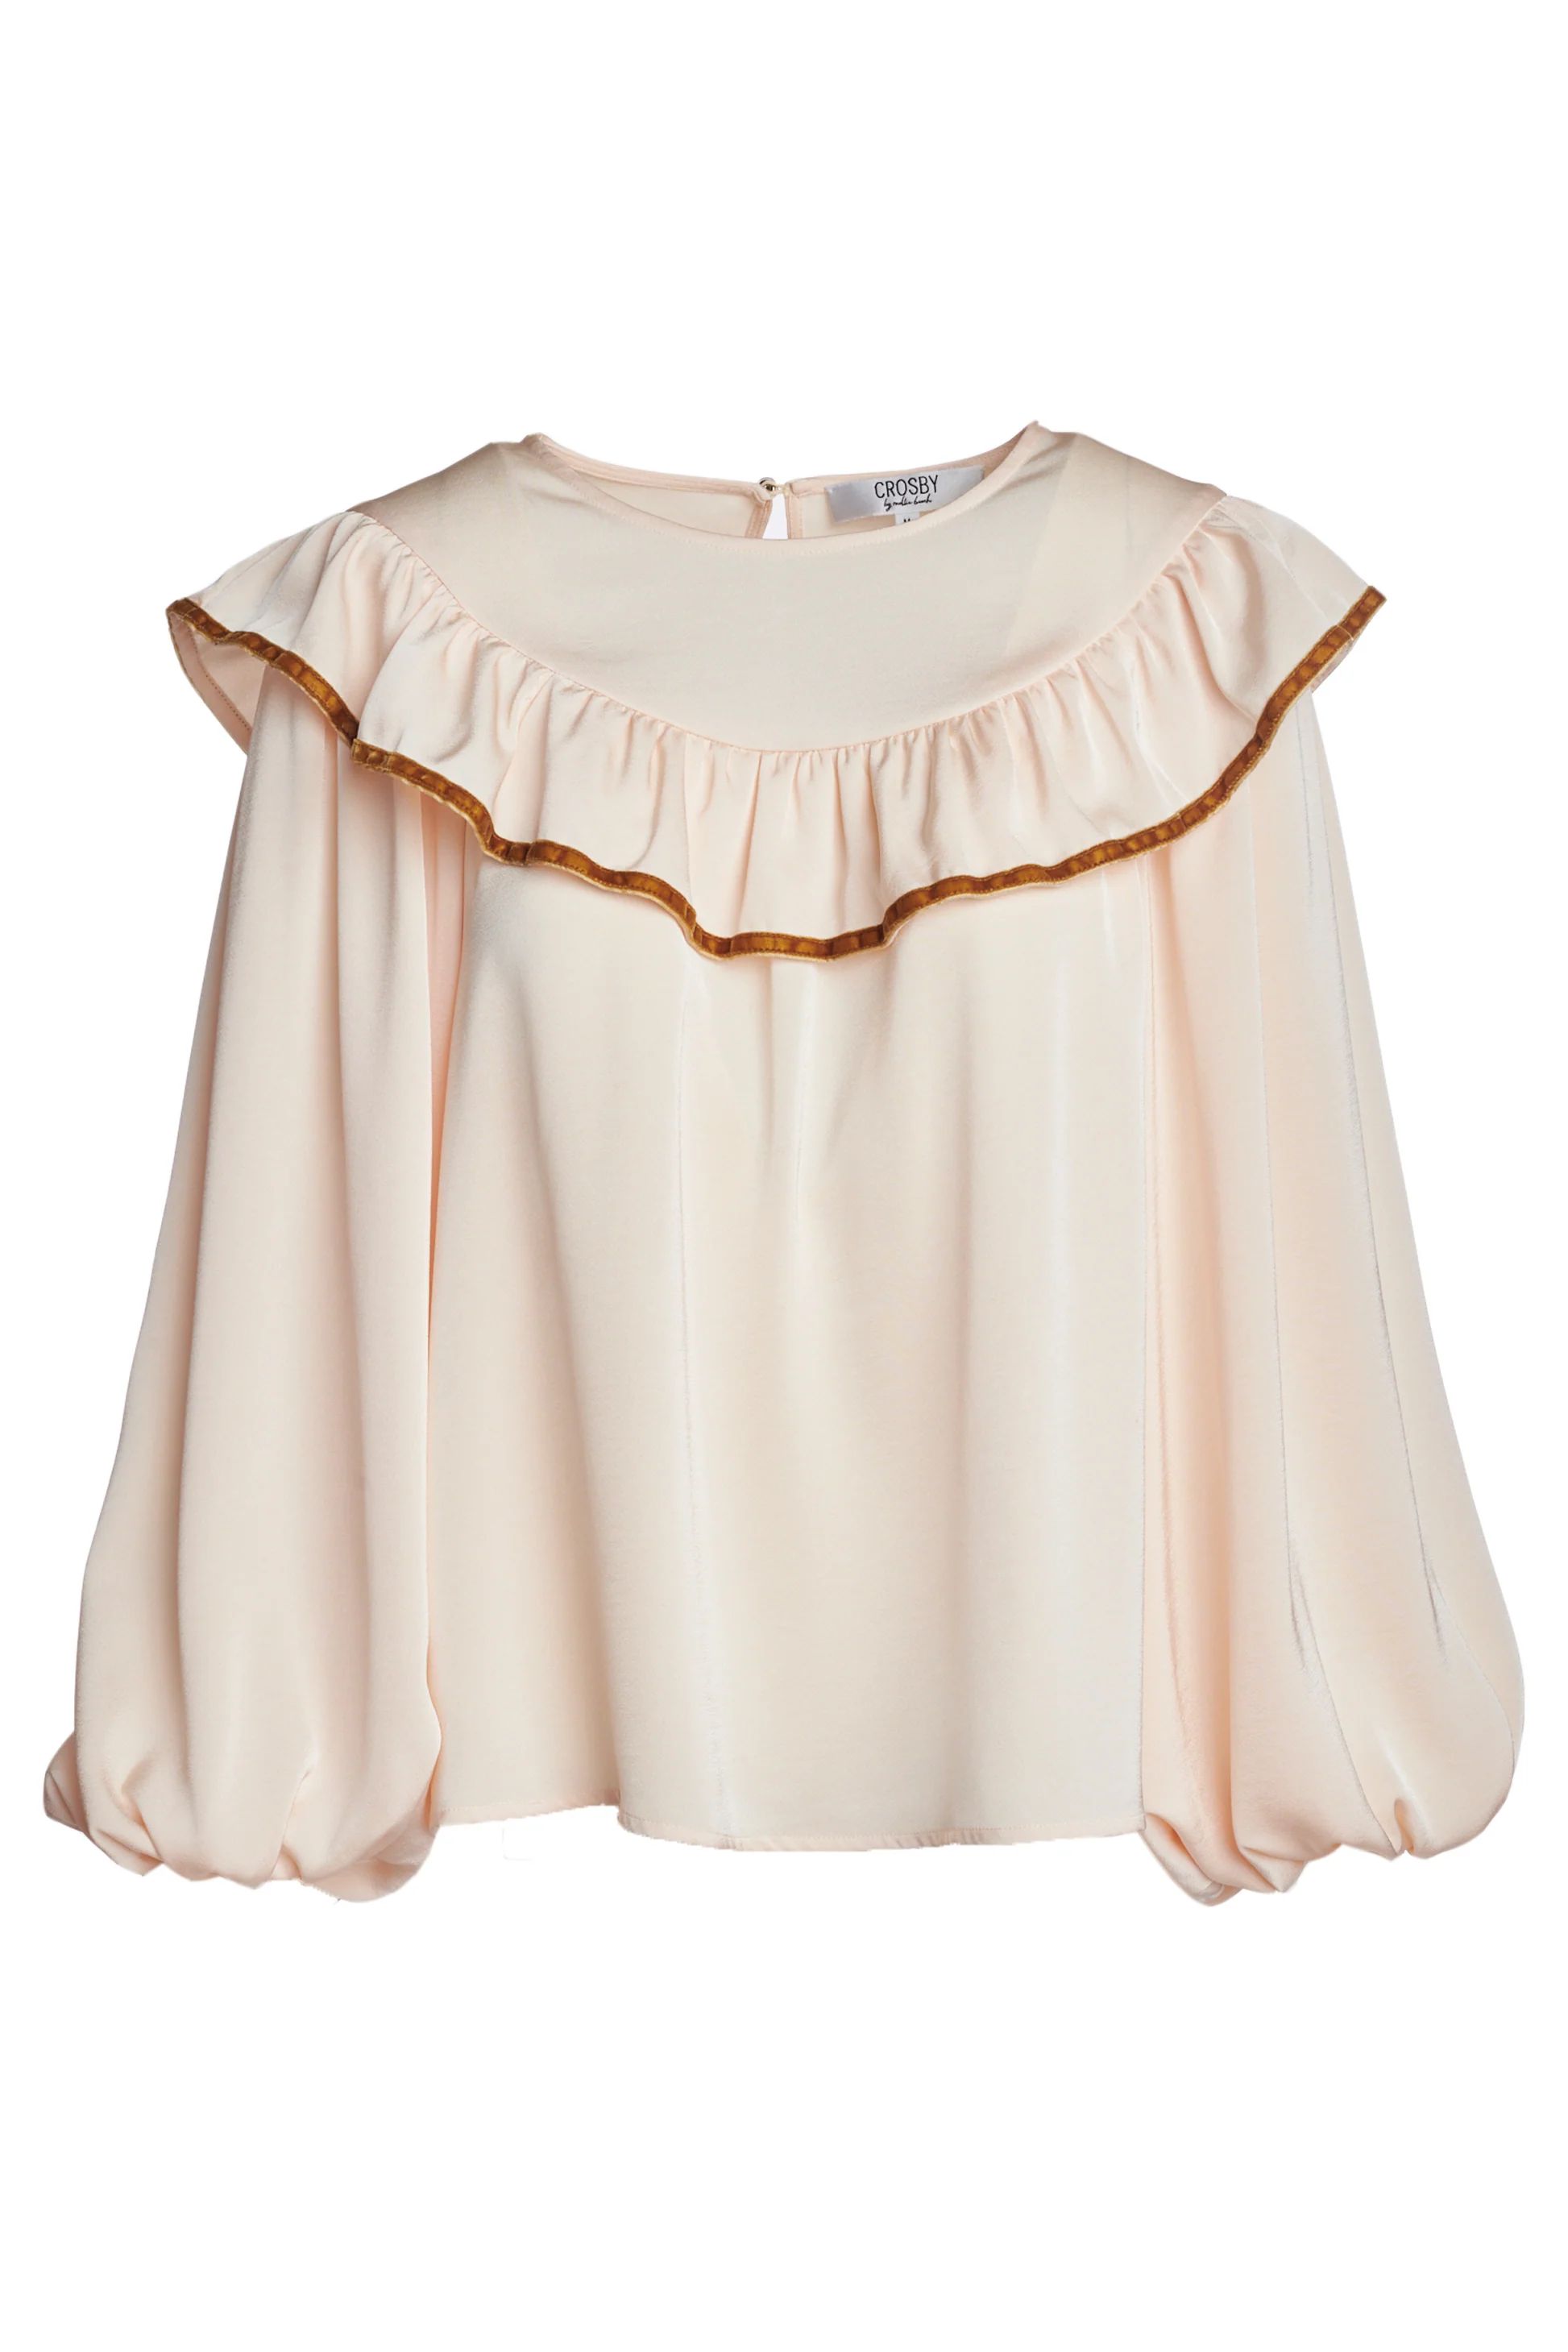 Francine Top in Ivory - CROSBY by Mollie Burch | CROSBY by Mollie Burch